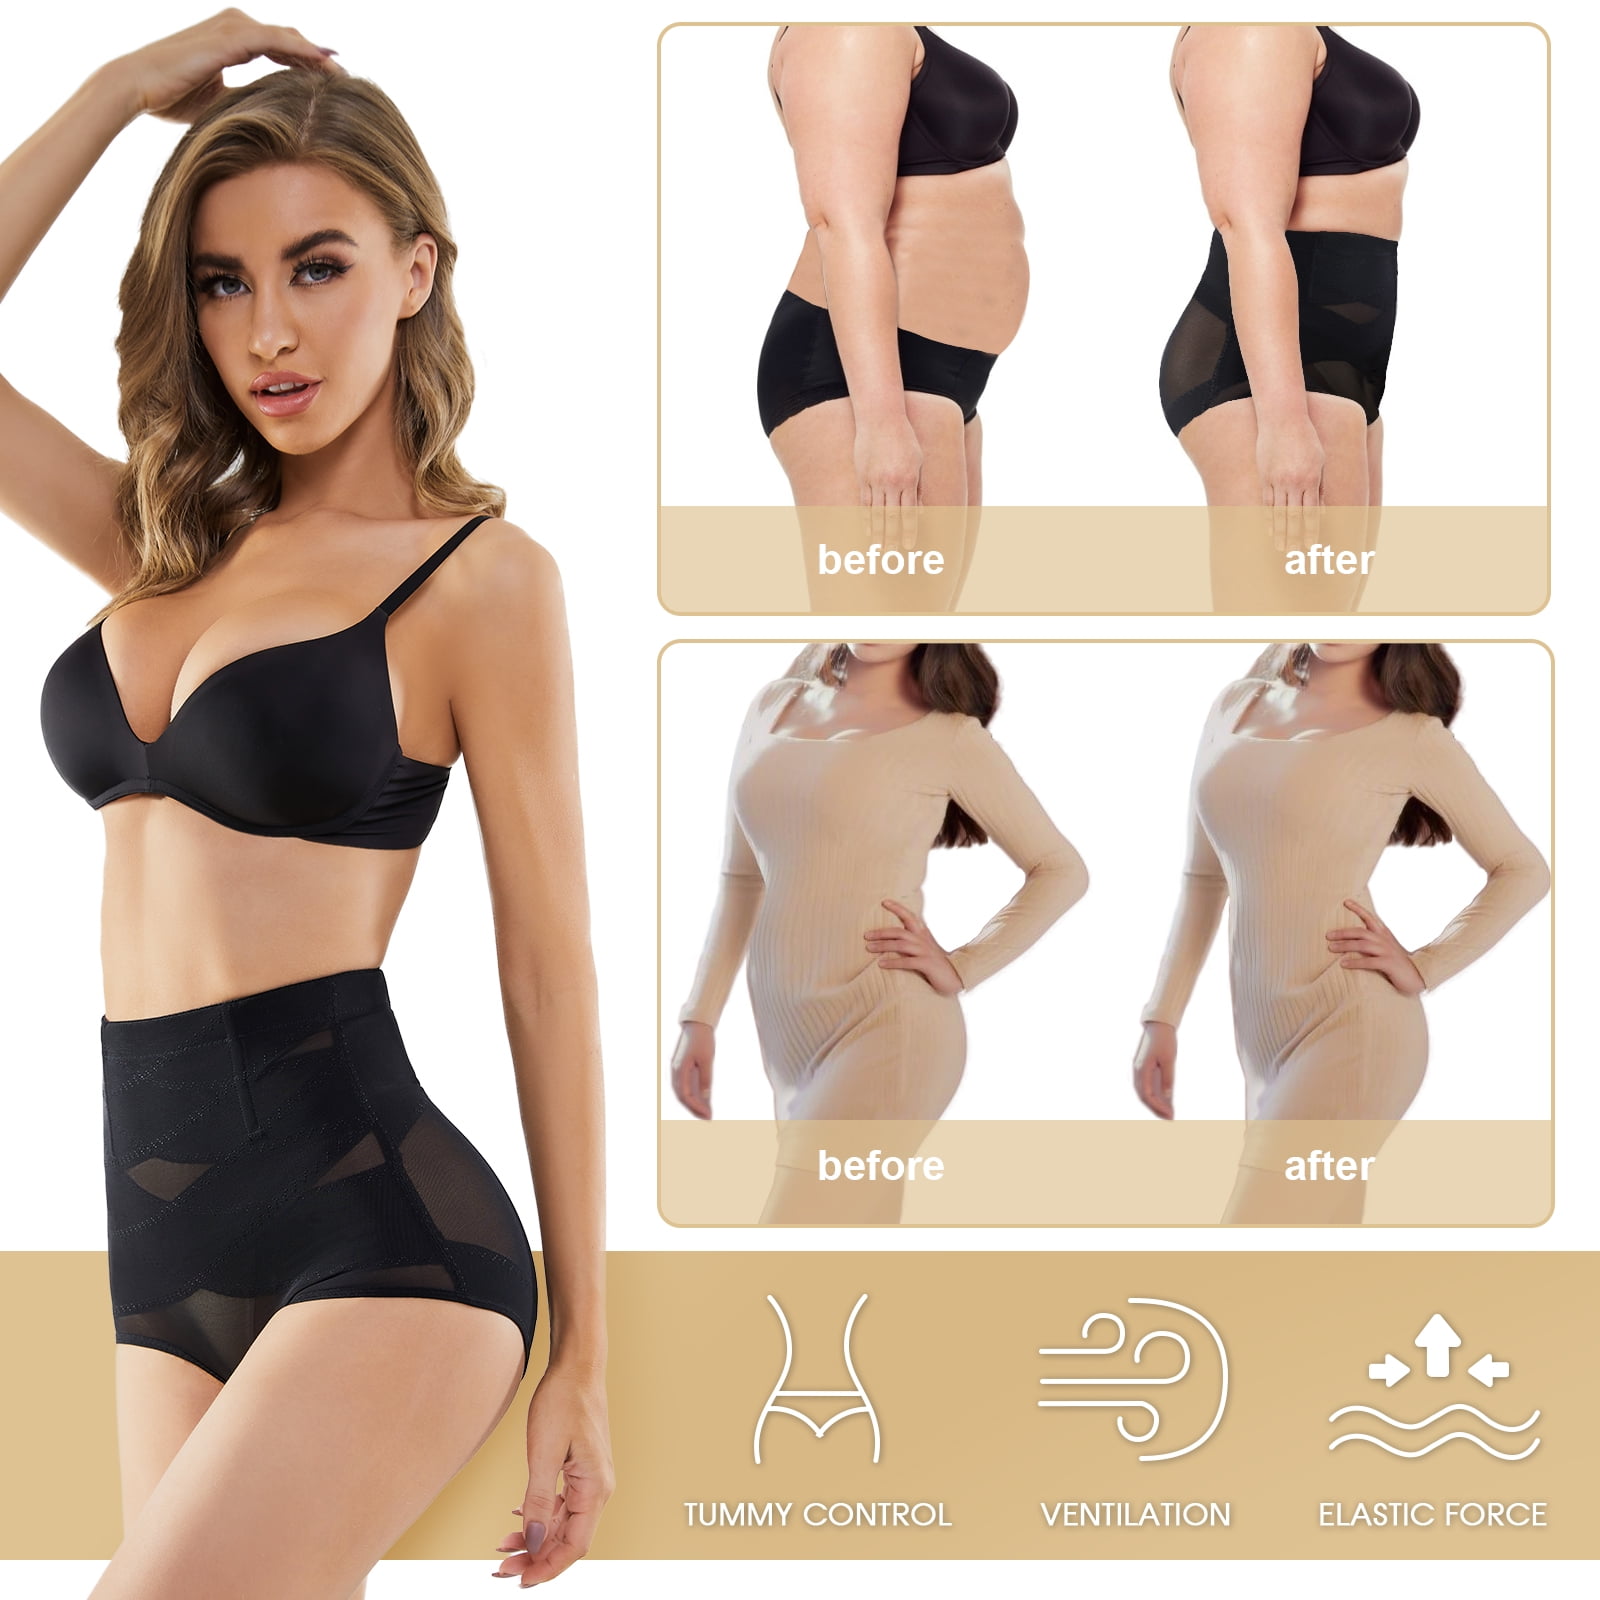 High Waisted Tummy Control Body Shaper Panty: Womens Shapers For Everyday  Wear From Edarebecca, $8.97